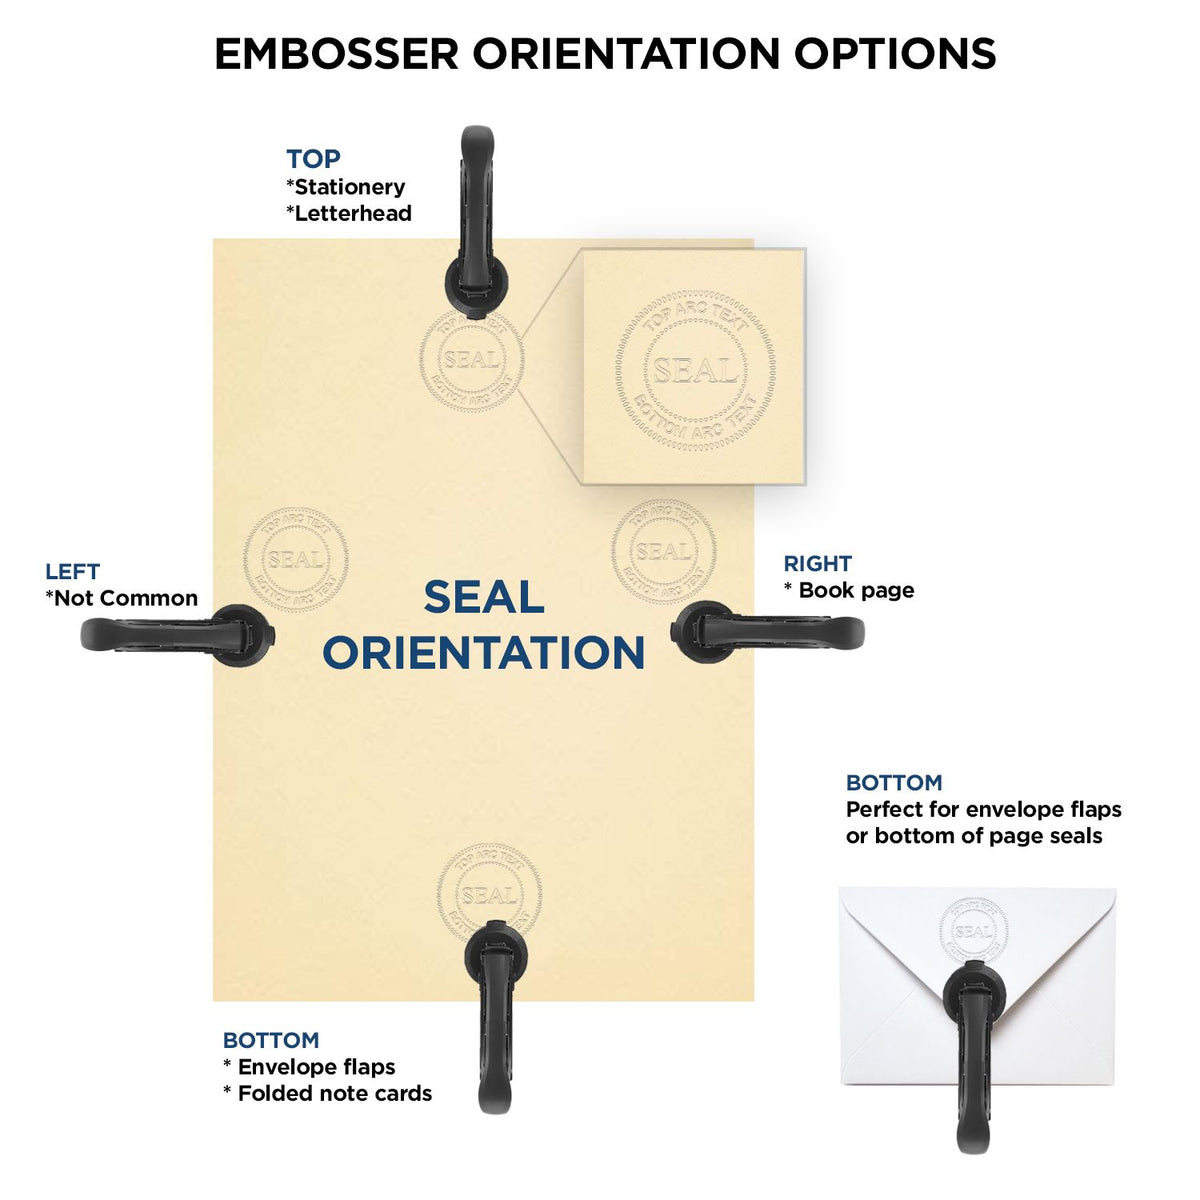 An infographic for the Handheld New Hampshire Professional Engineer Embosser showing embosser orientation, this is showing examples of a top, bottom, right and left insert.